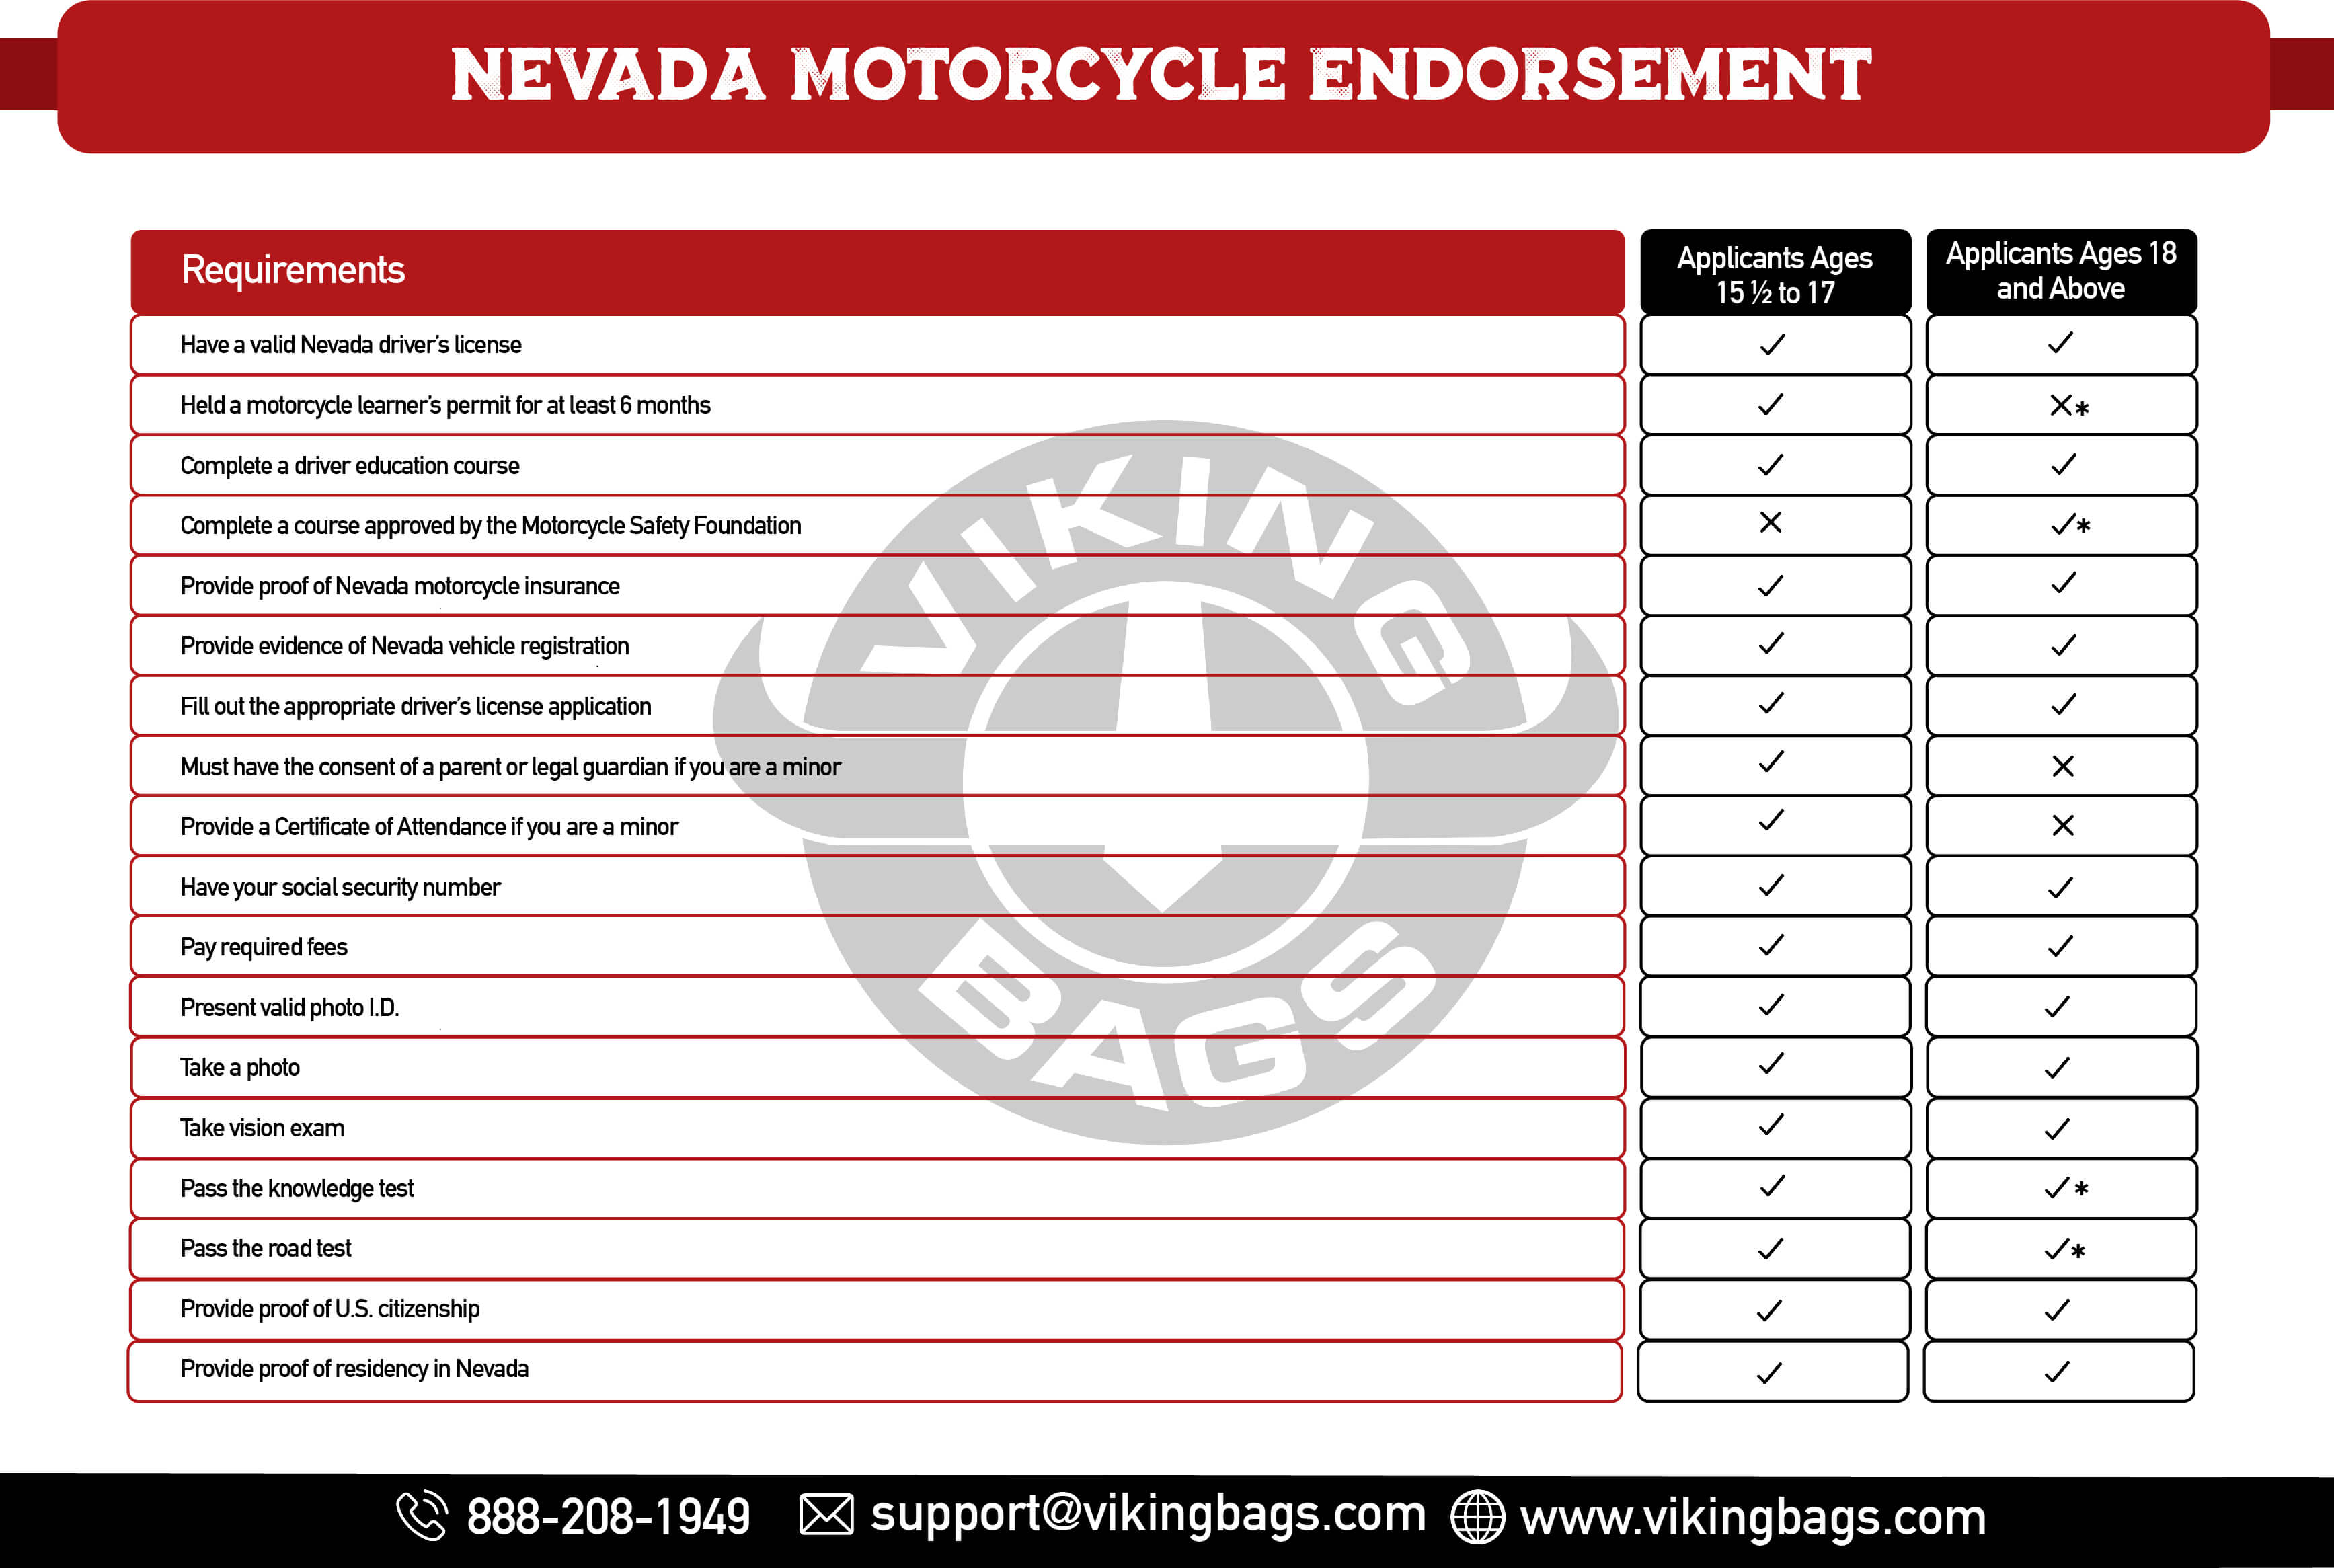 Requirements for a Nevada Motorcycle Endorsement